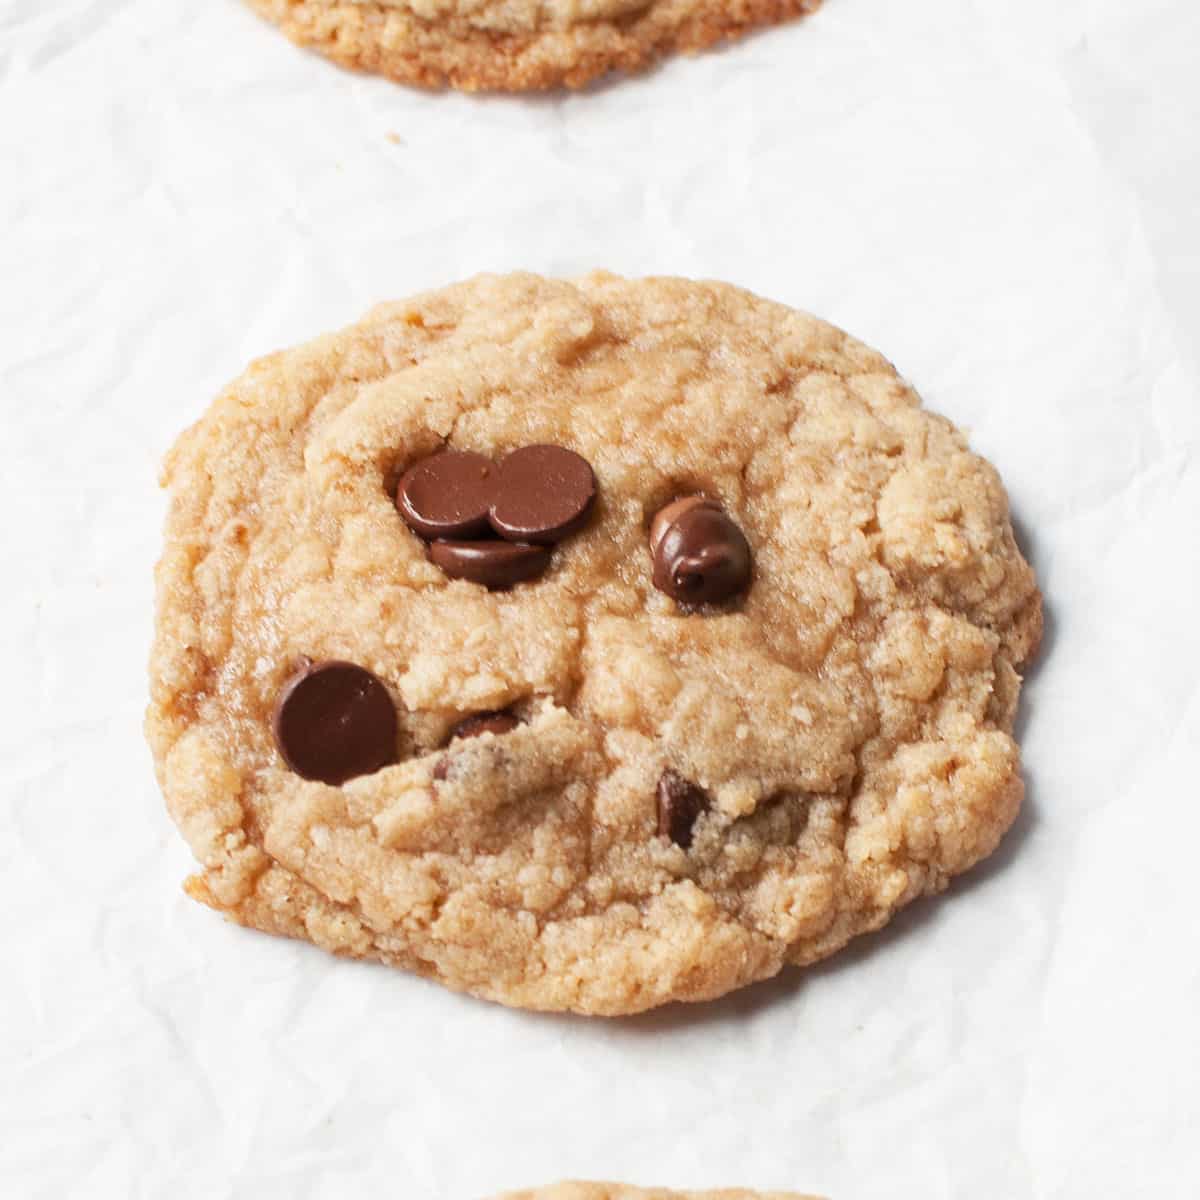 A single chocolate chip cookie on a parchment paper.